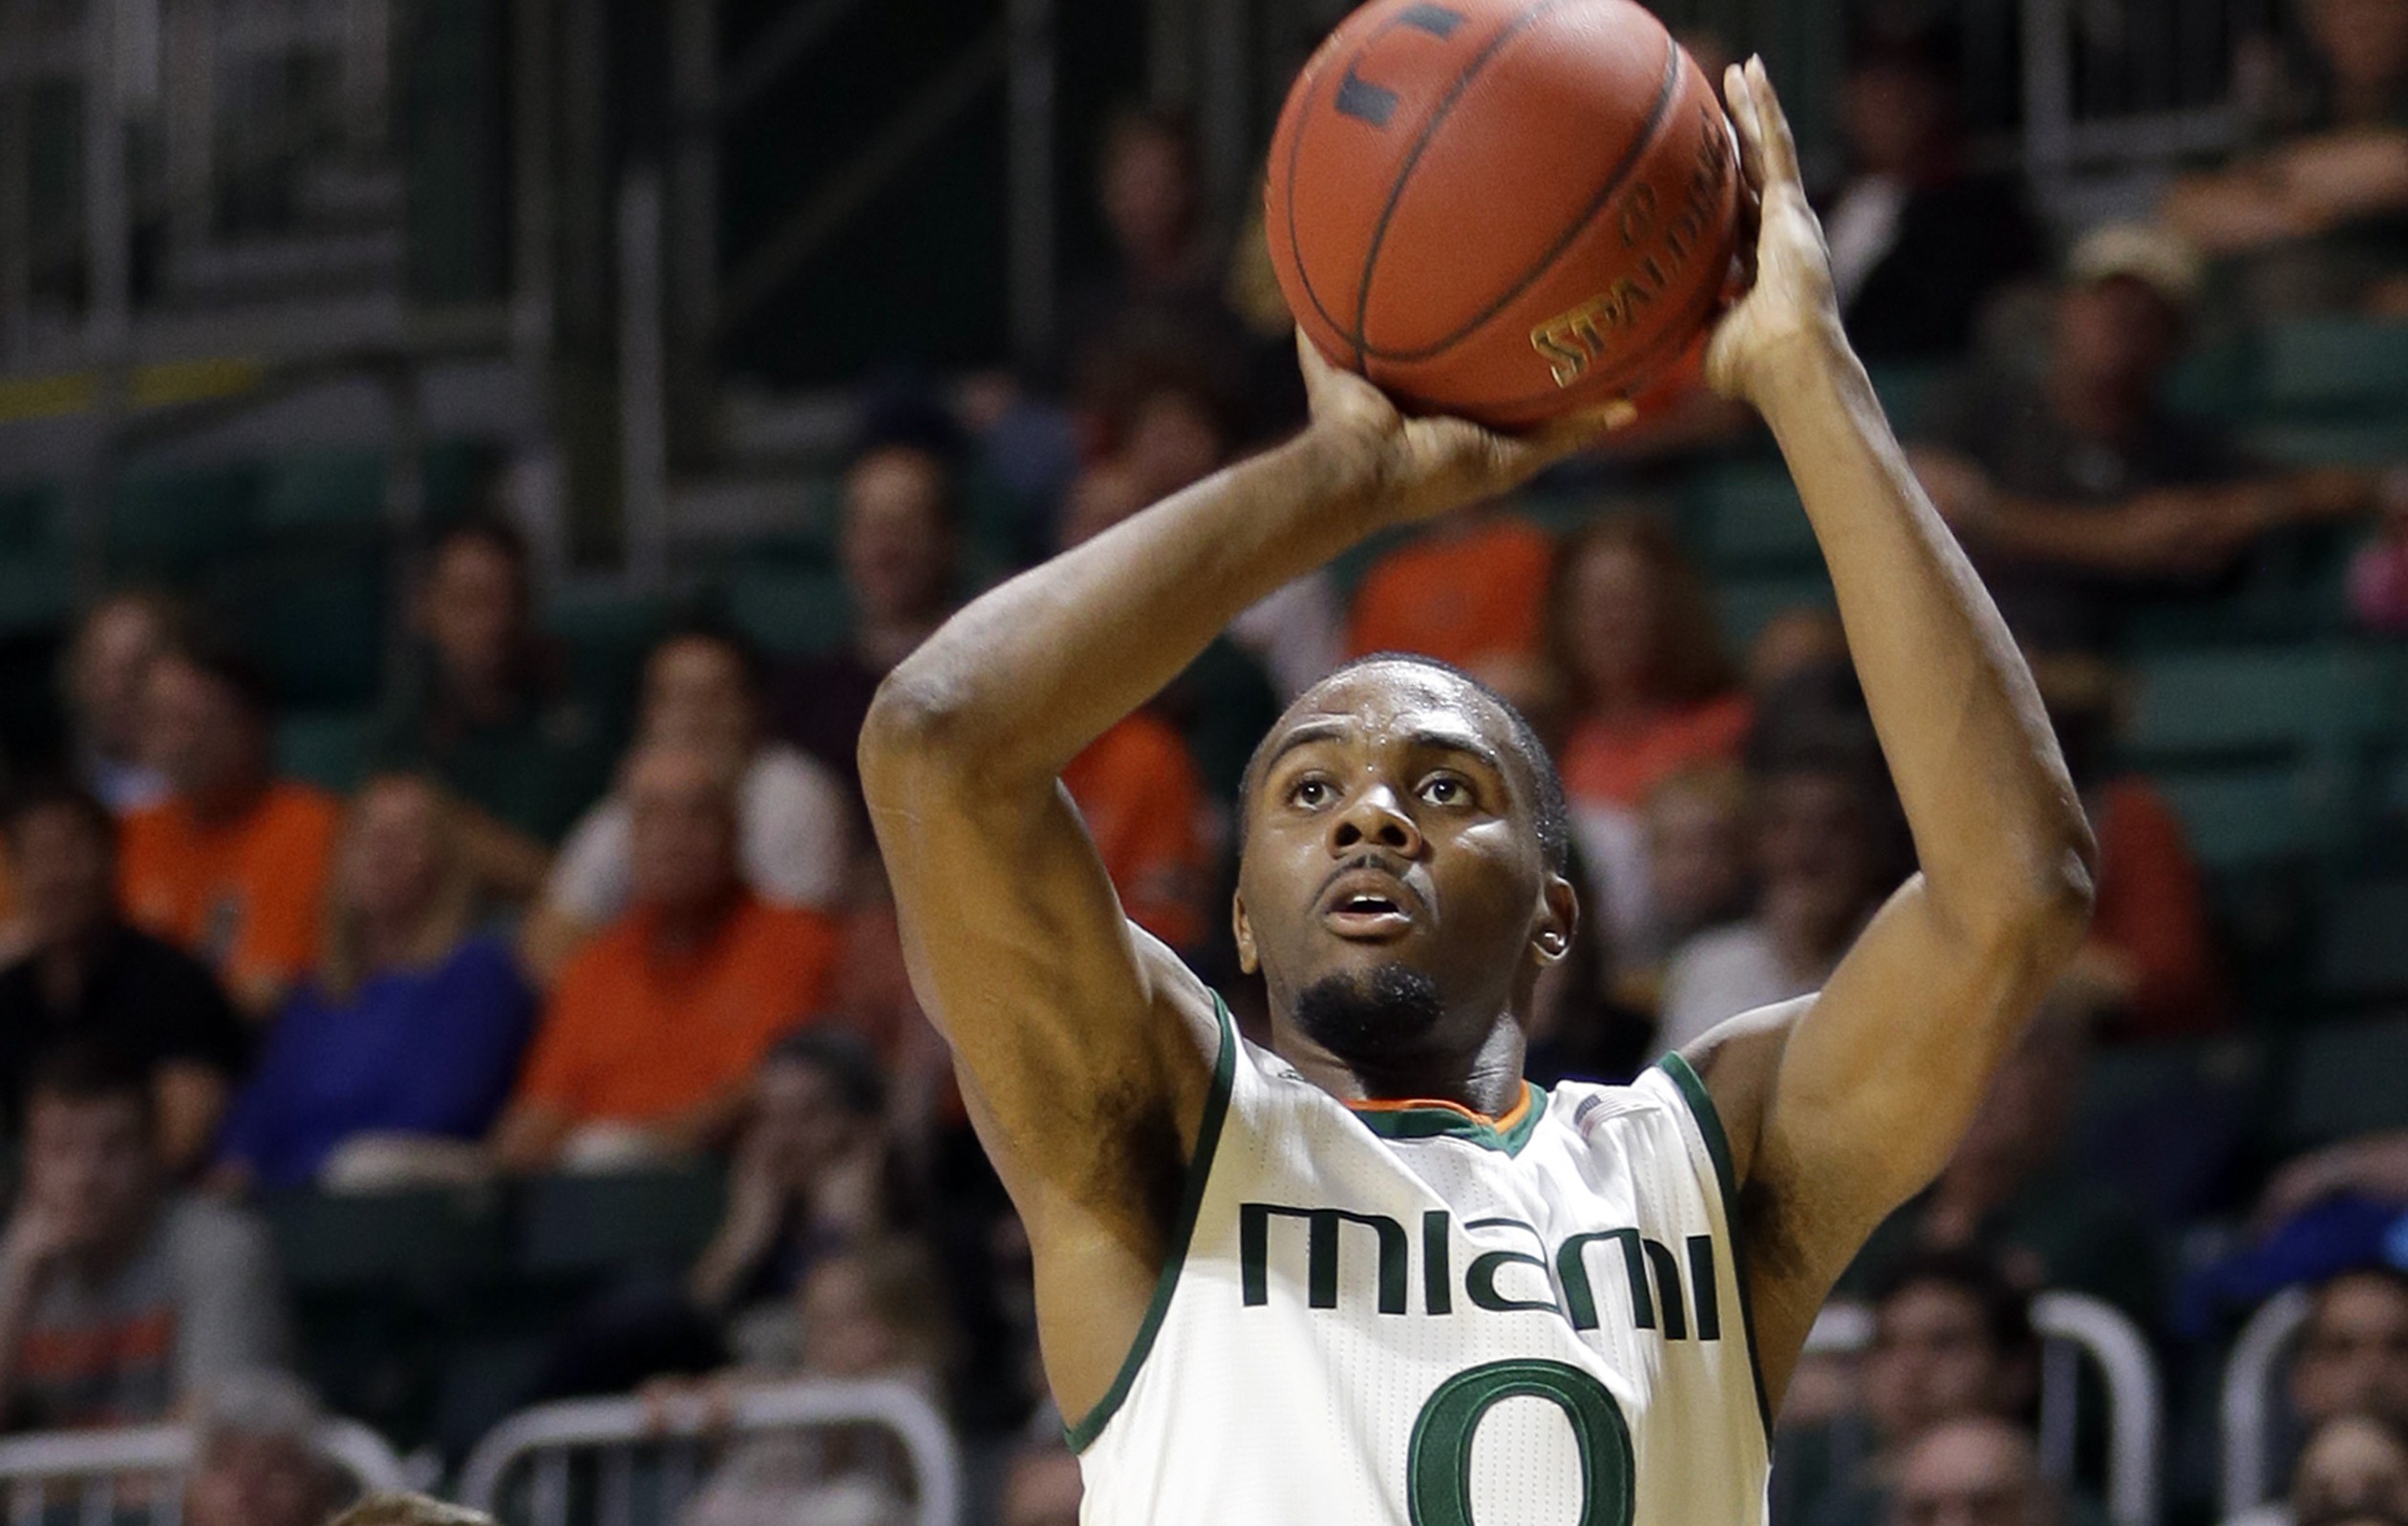 Miami guard Ja'Quan Newton (0) prepares to shoot against Charlotte during the first half of an NCAA college basketball game, Saturday, Dec. 5, 2015, in Coral Gables, Fla. (AP Photo/Alan Diaz)